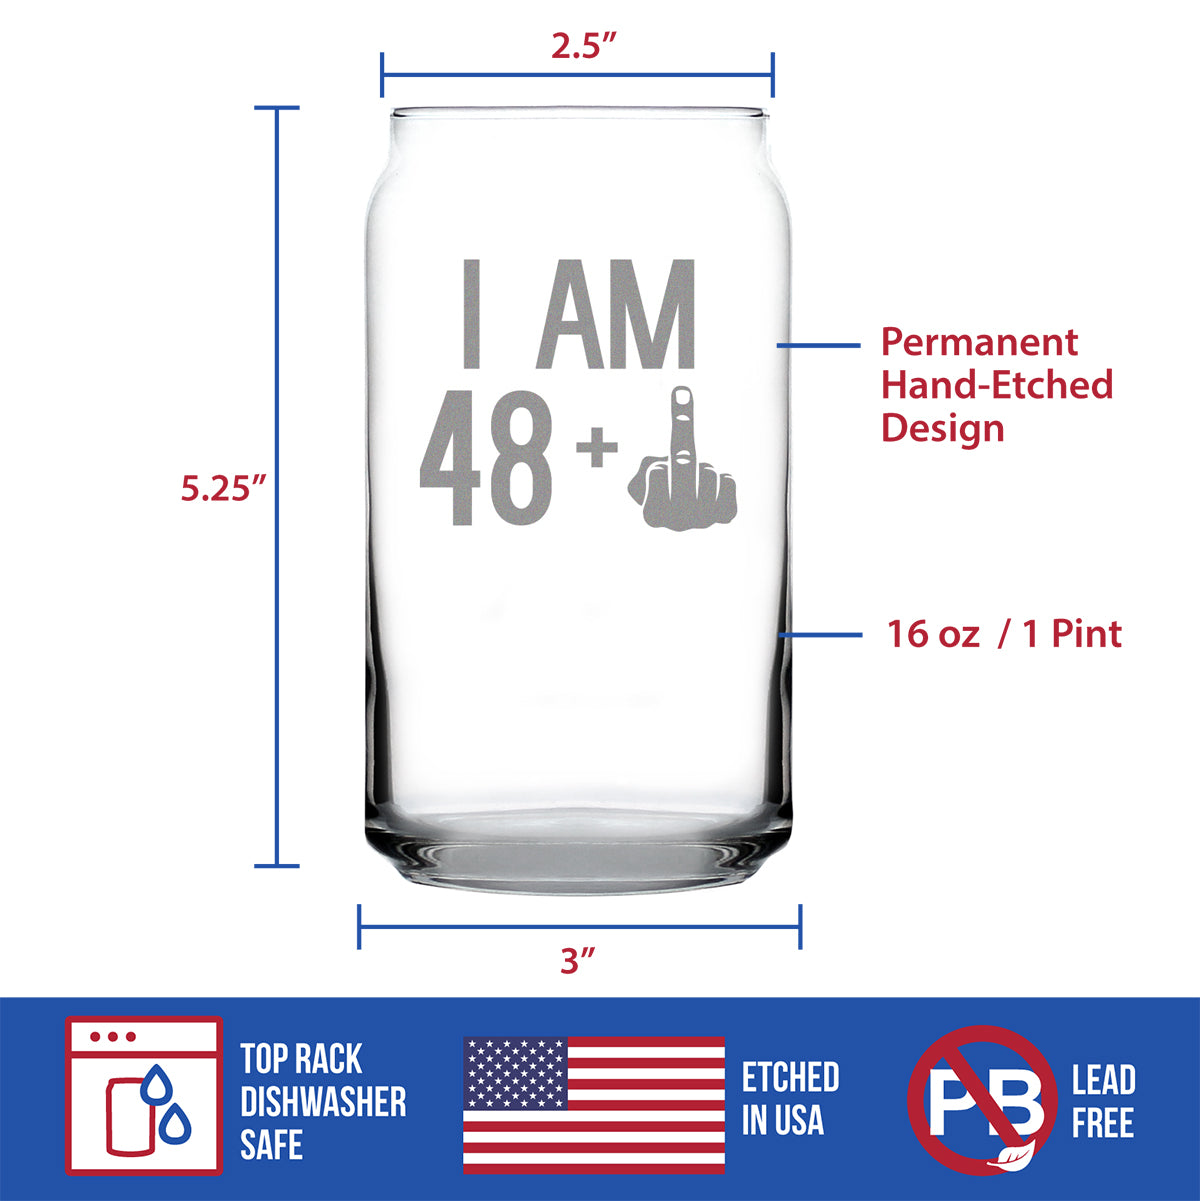 I Am 48 + 1 Middle Finger - 16 oz Beer Can Pint Glass - Funny 49th Birthday Gifts for Men or Women Turning 49